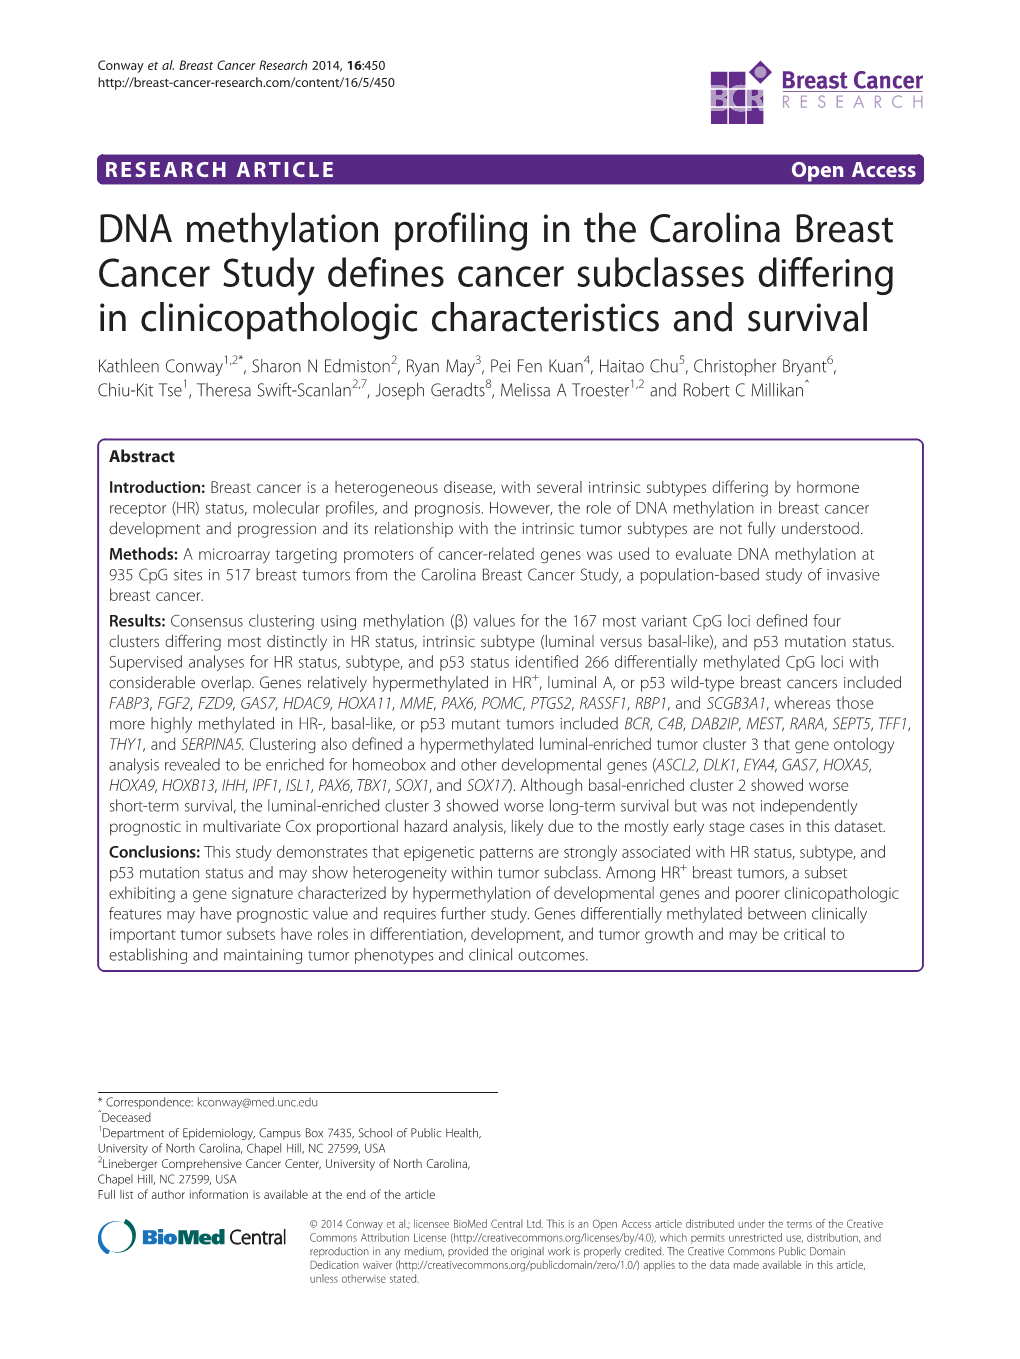 DNA Methylation Profiling in the Carolina Breast Cancer Study Defines Cancer Subclasses Differing in Clinicopathologic Character